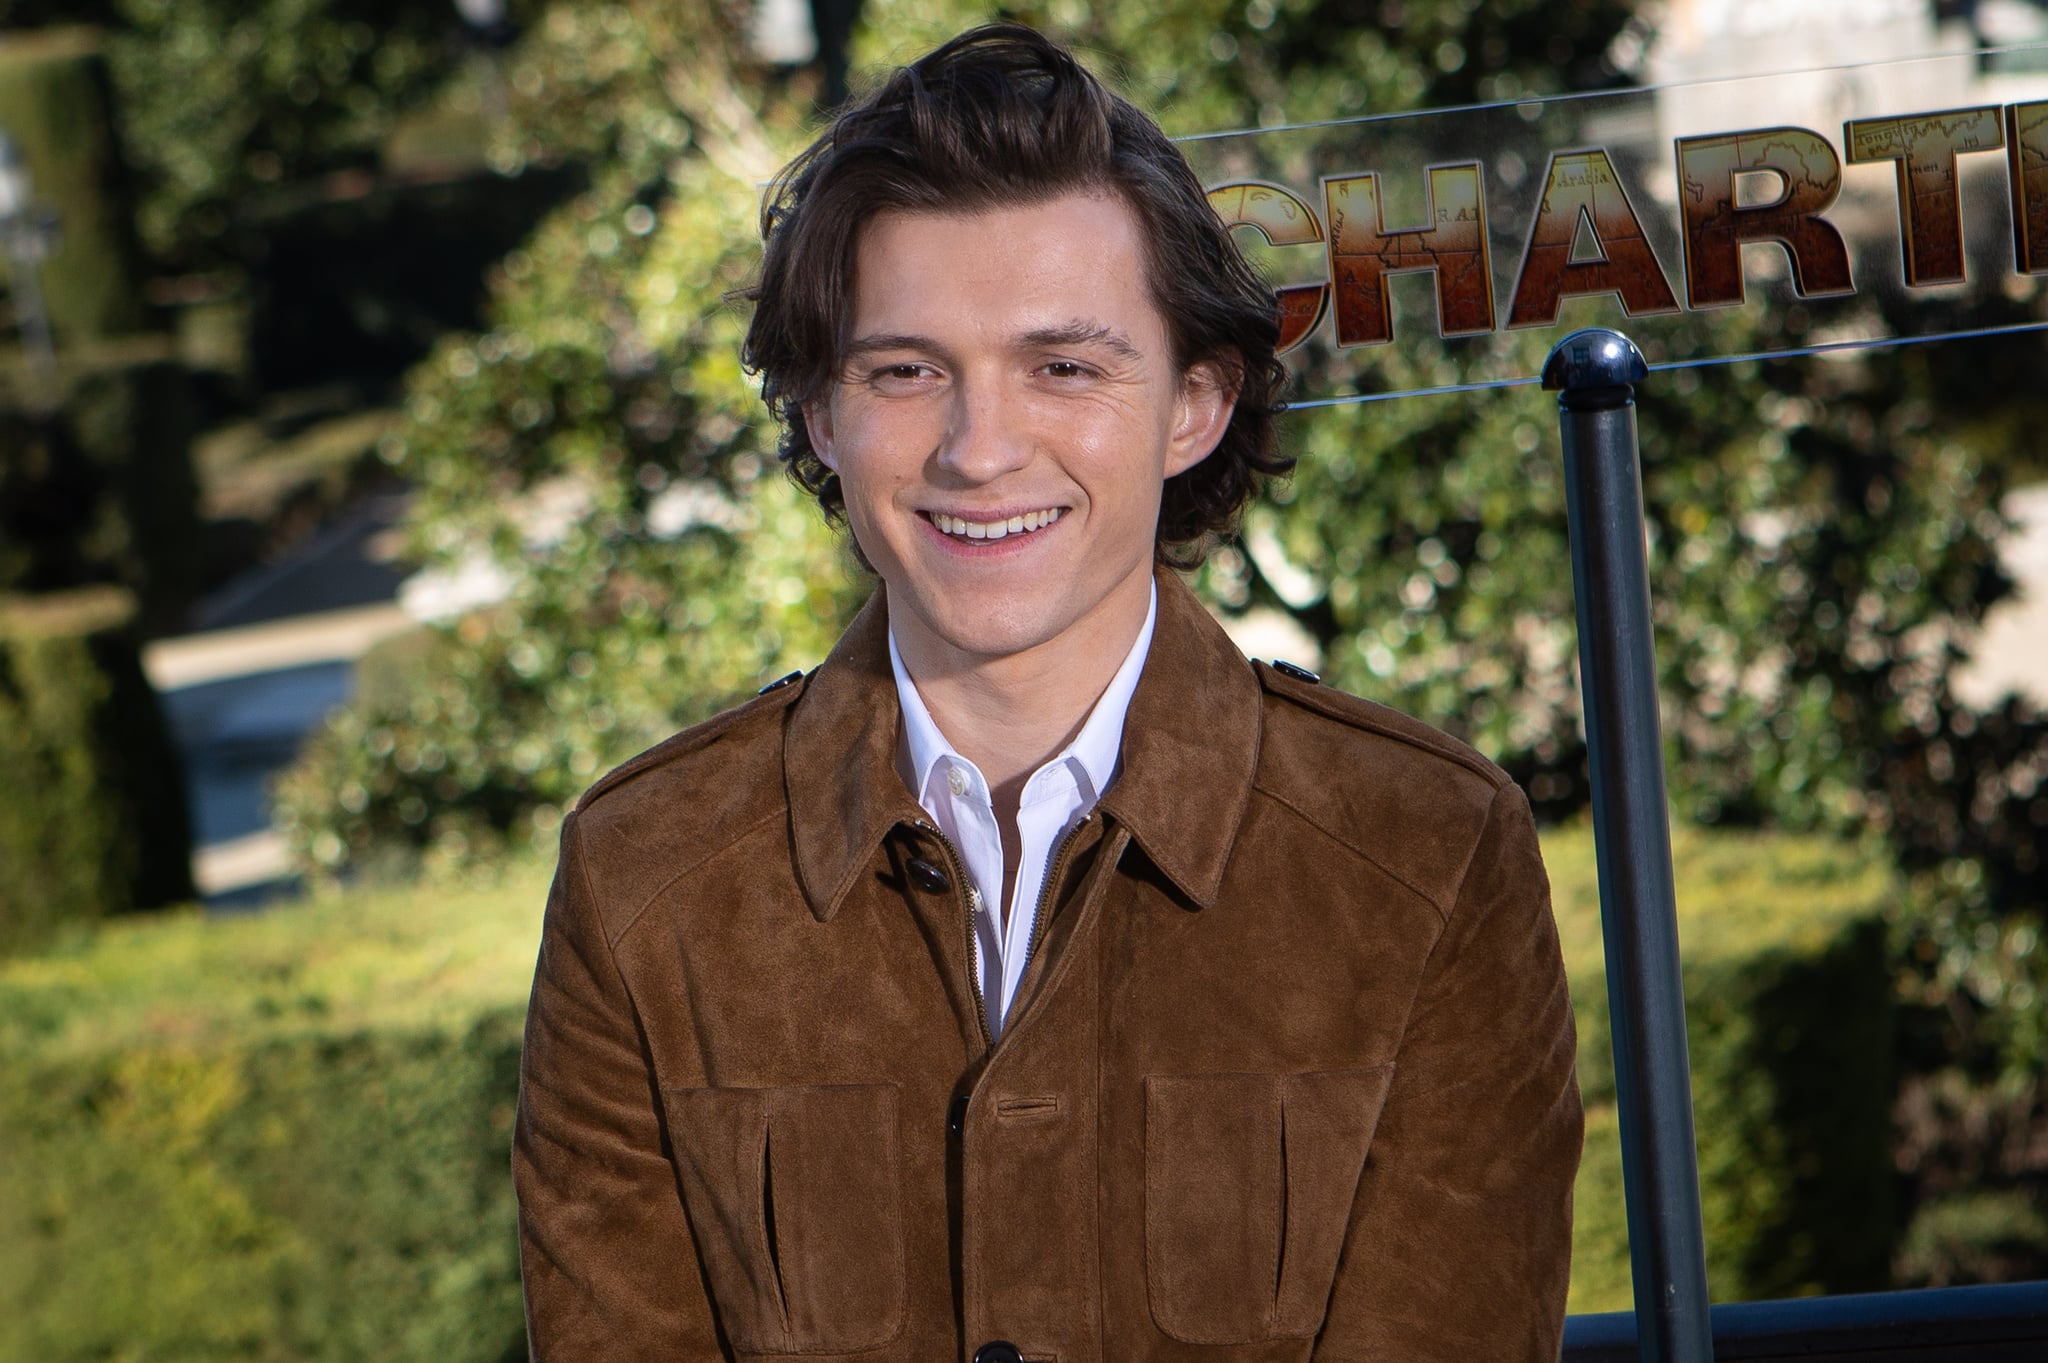 MADRID, SPAIN - FEBRUARY 08: Actor Tom Holland attends 'Uncharted' photocall at the Royal Theater  on February 08, 2022 in Madrid, Spain. (Photo by Pablo Cuadra/WireImage)